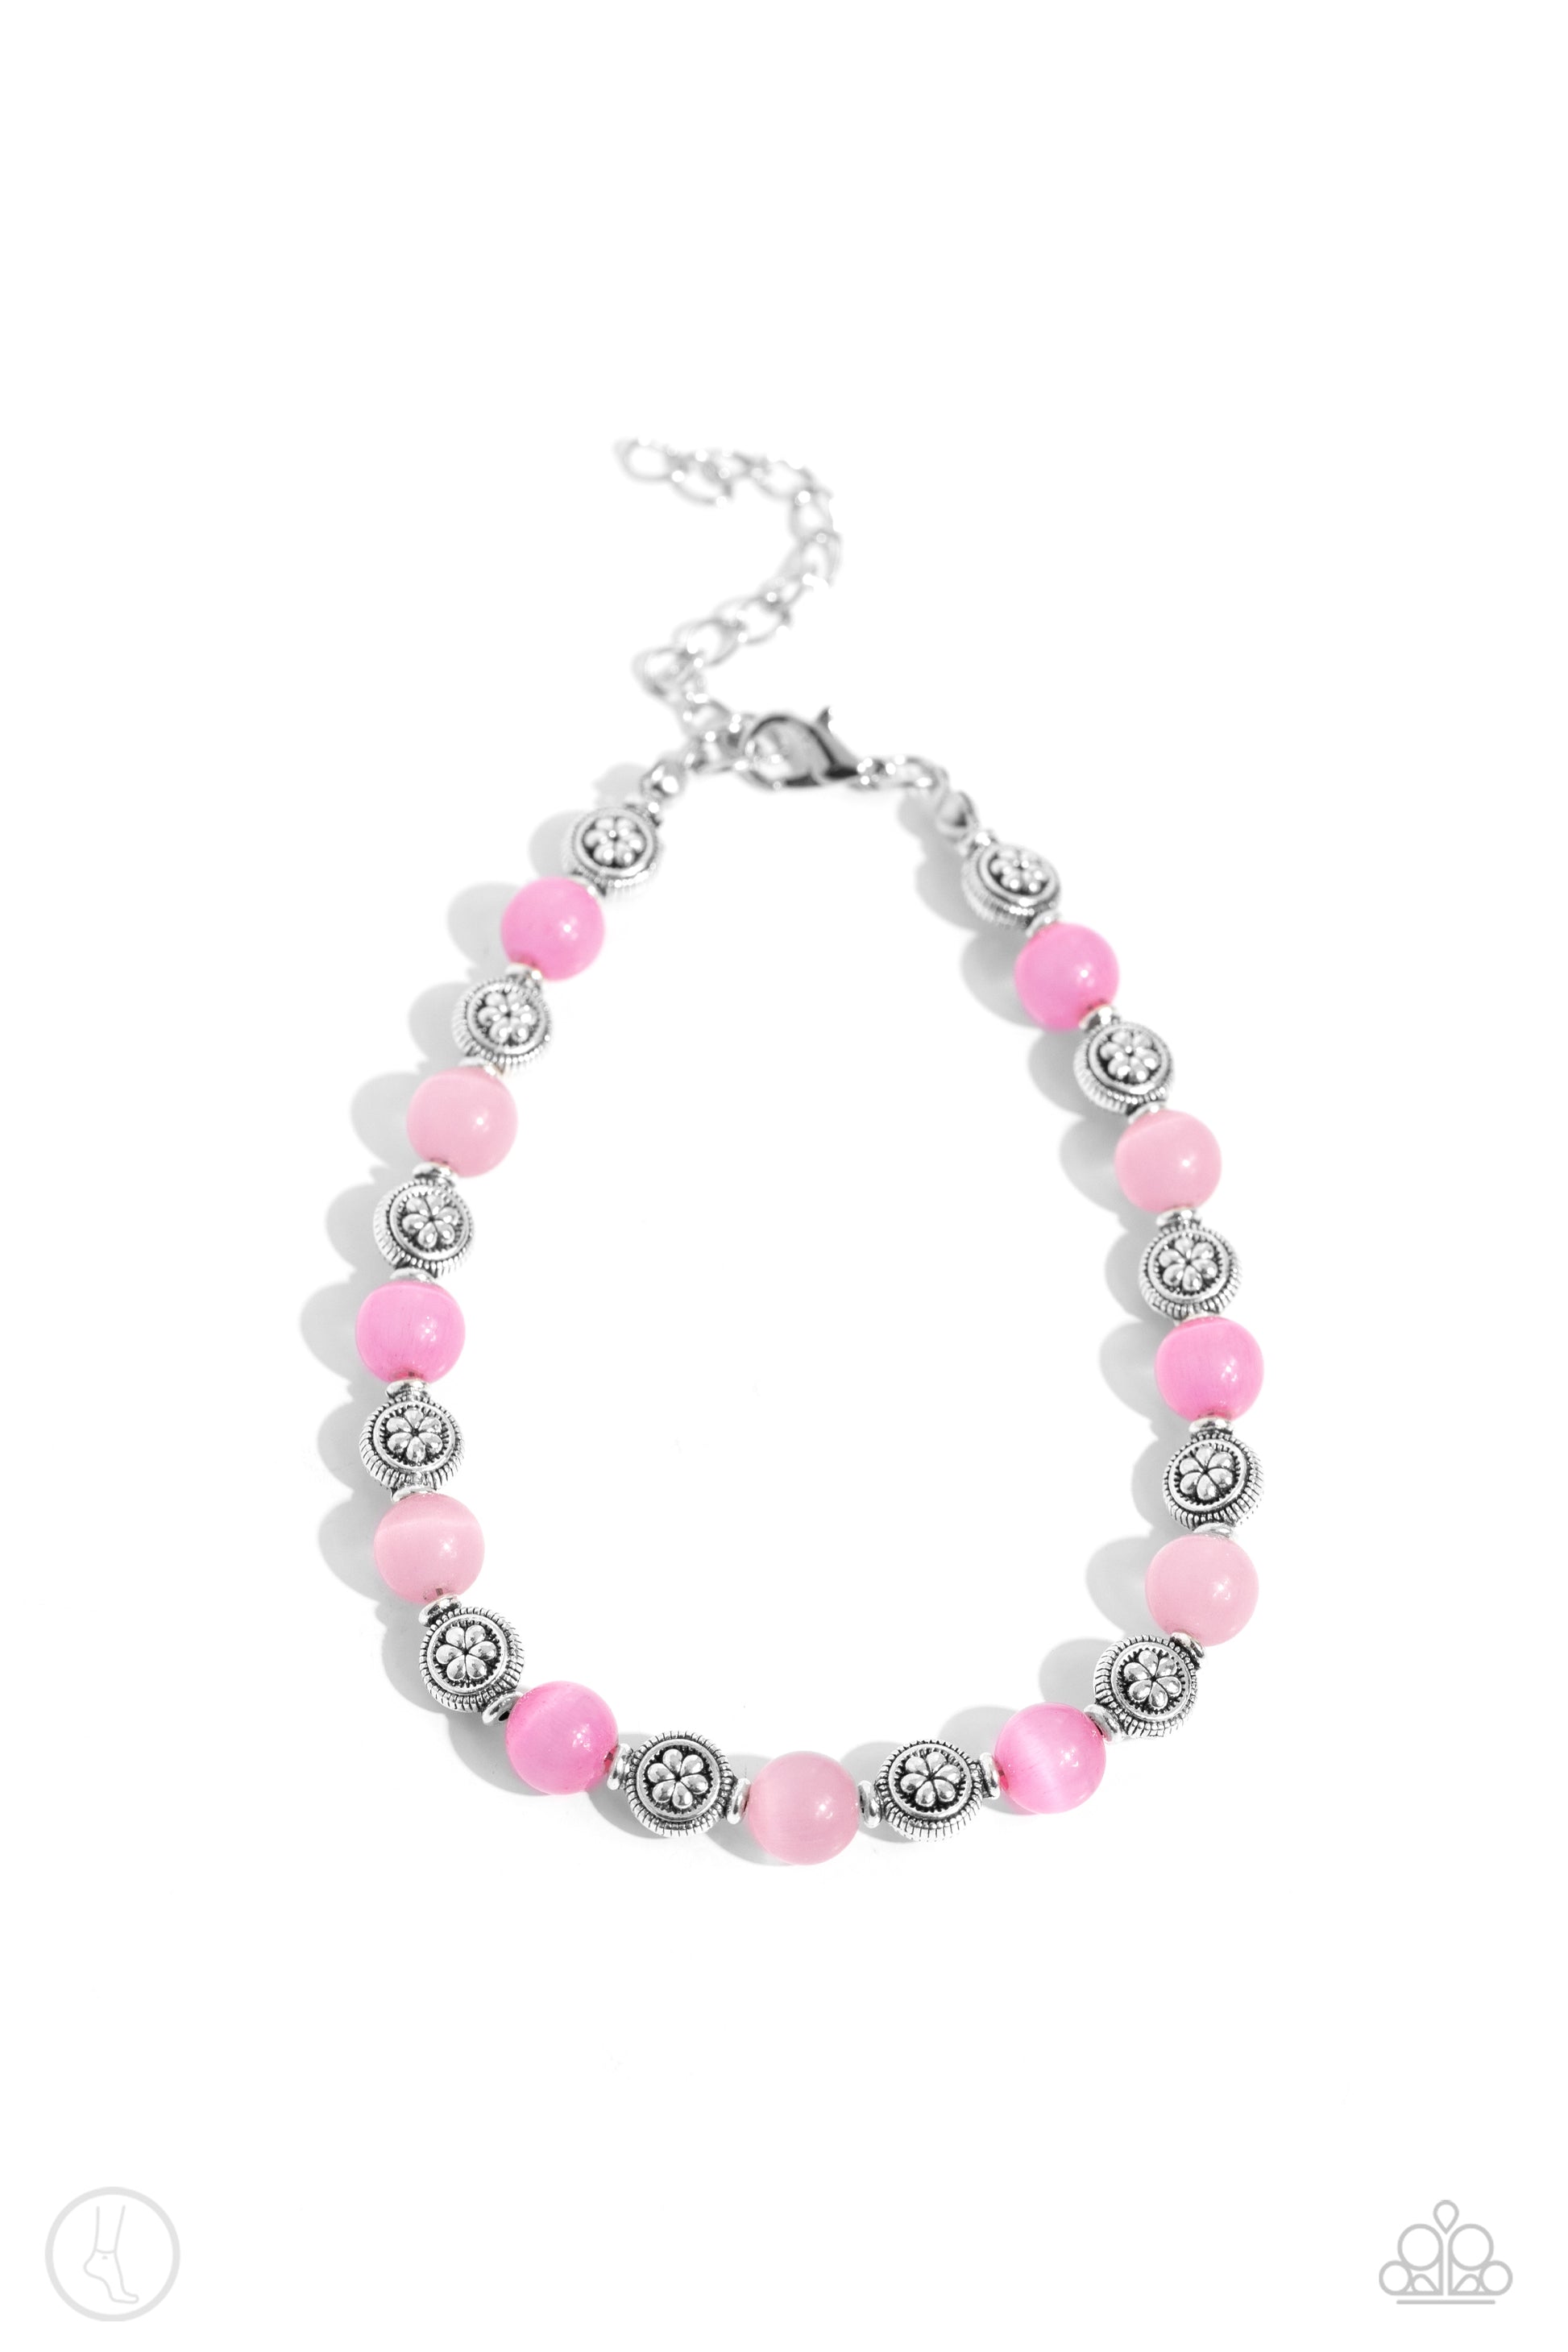 <p>Paparazzi Accessories - Beacy Bouquet - Pink Anklets infused along an invisible wire, a glowing collection of various pink cat's eye stones alternate with floral motif textured silver beads for a beachy statement around the ankle. Features an adjustable clasp closure.</p> <p><i>Sold as one individual anklet.</i></p>